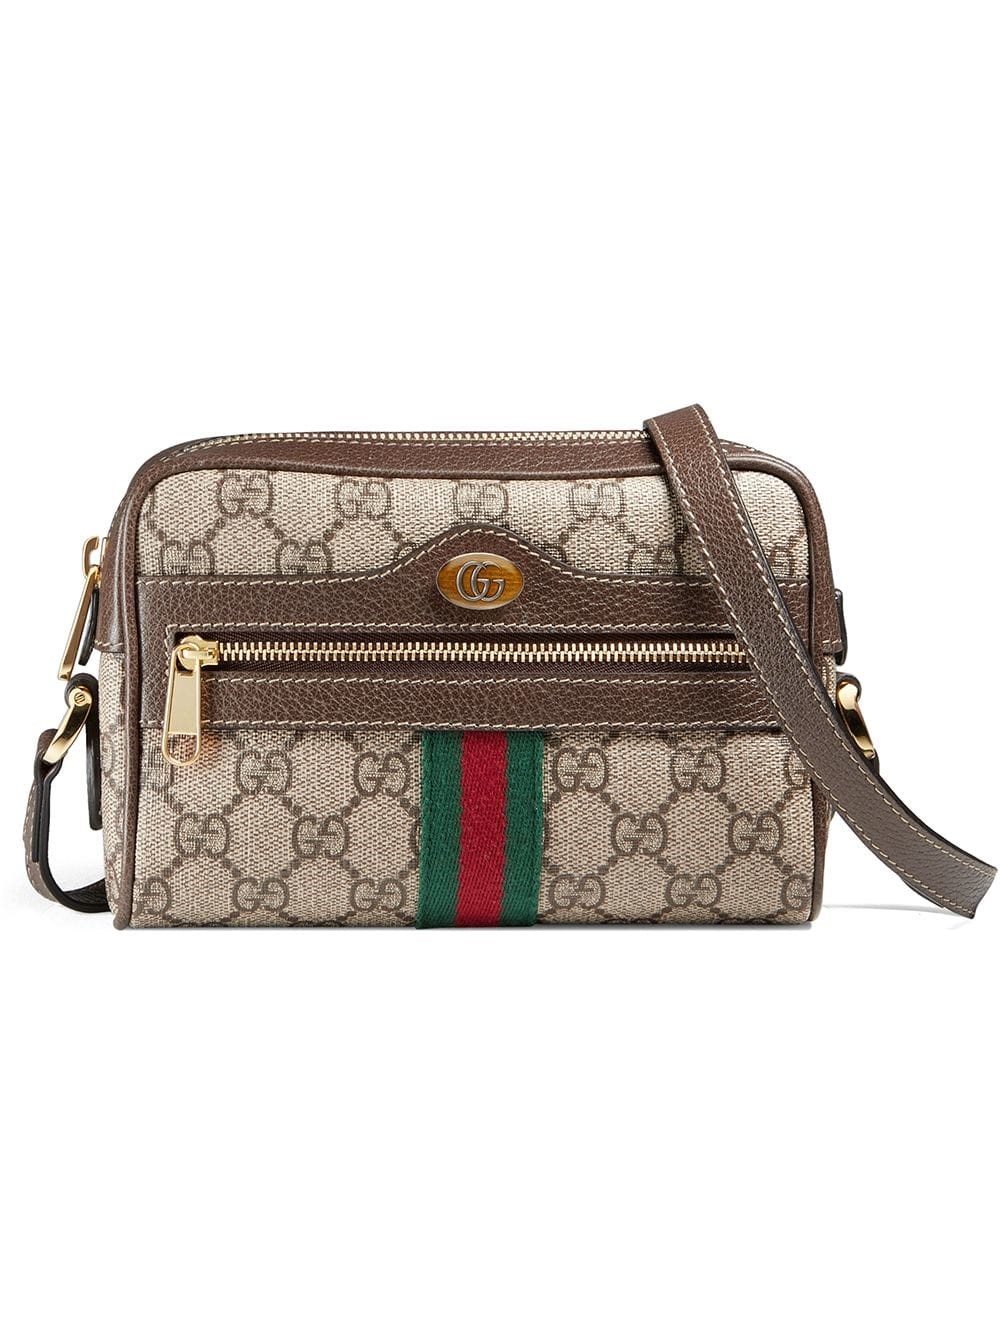 gucci OPHIDIA CROSS BODY BAG available on 0 - 27690